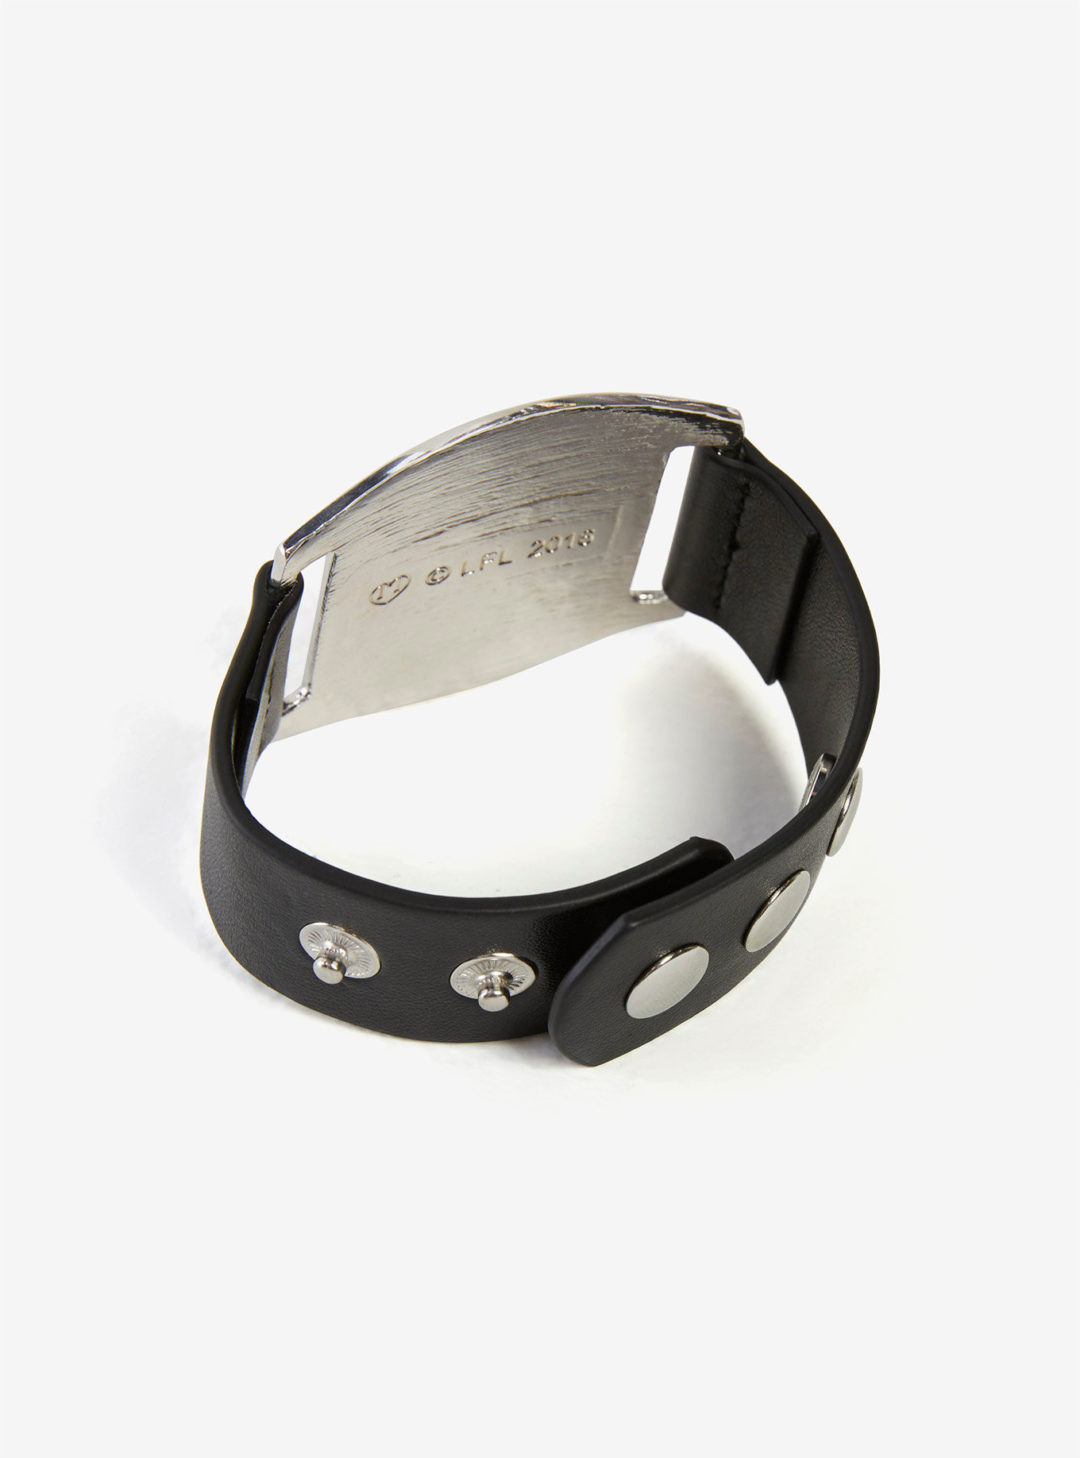 The Empire Strikes Back Crawl Text Cuff - The Kessel Runway